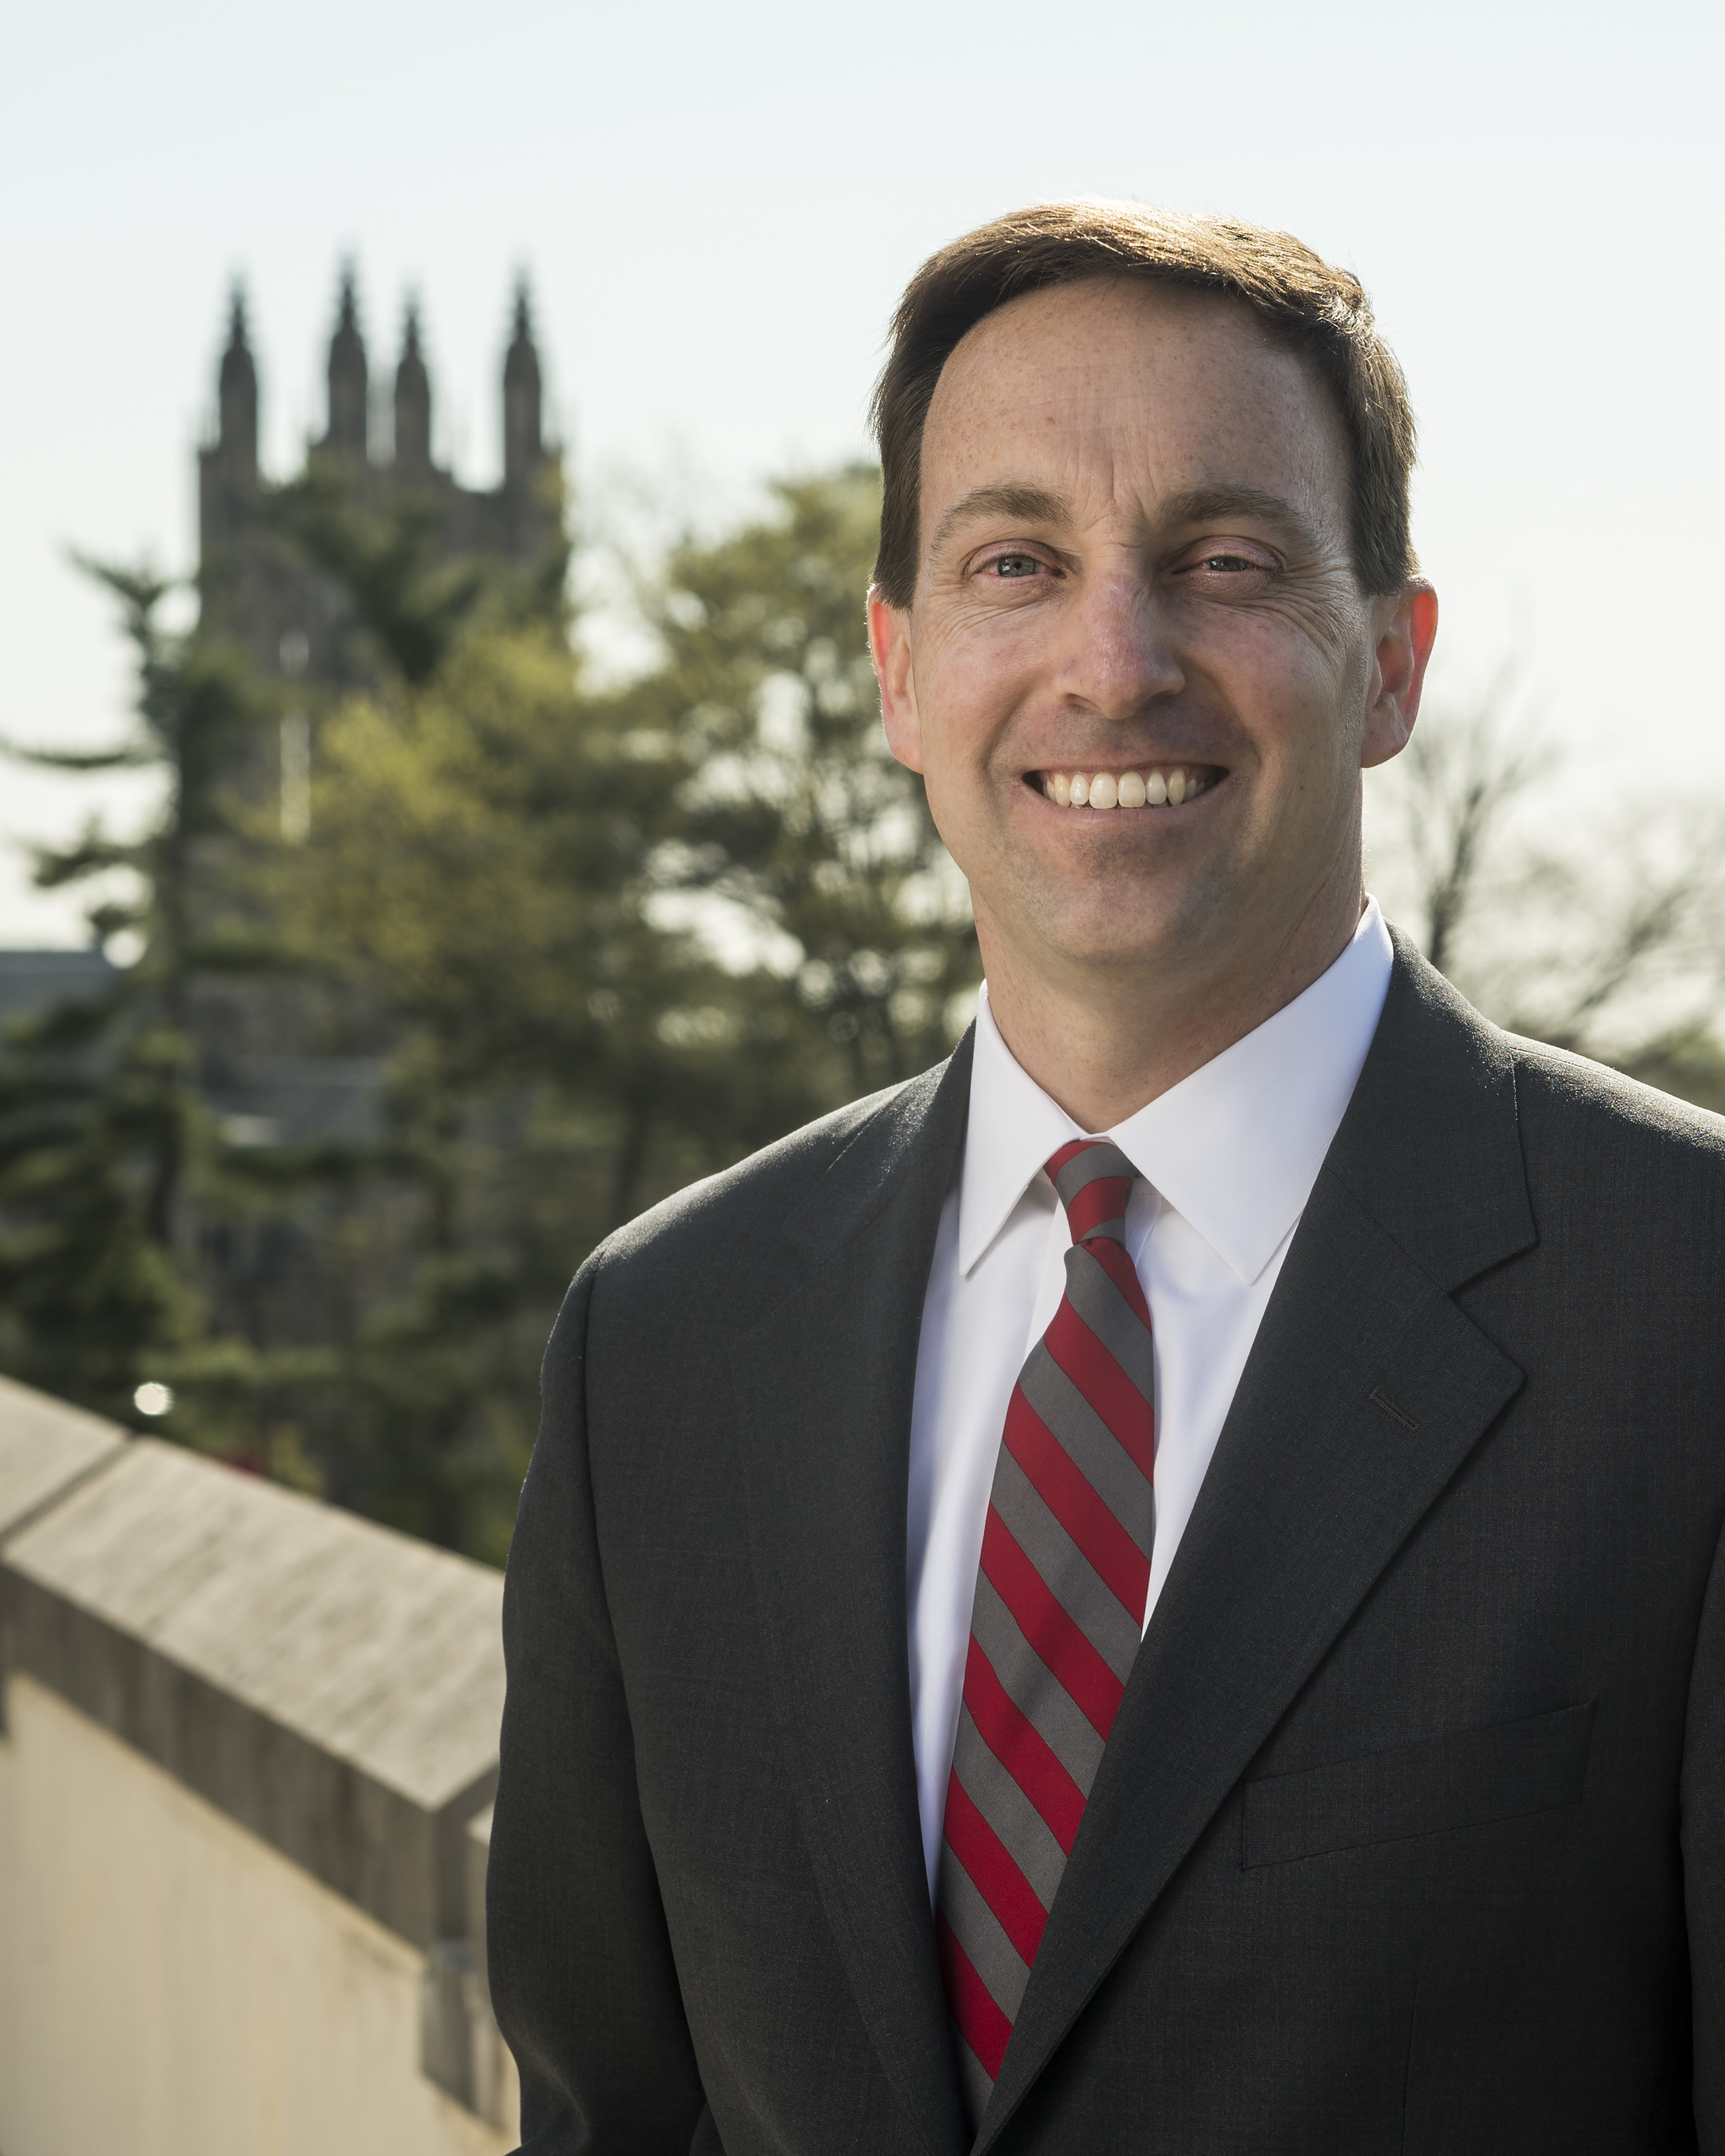 Mark C. Reed, Ed.D., is the president-elect of Saint Joseph's University in Philadelphia. Reed is the first layperson to be elected president in the 164-year history of the Jesuit institution.